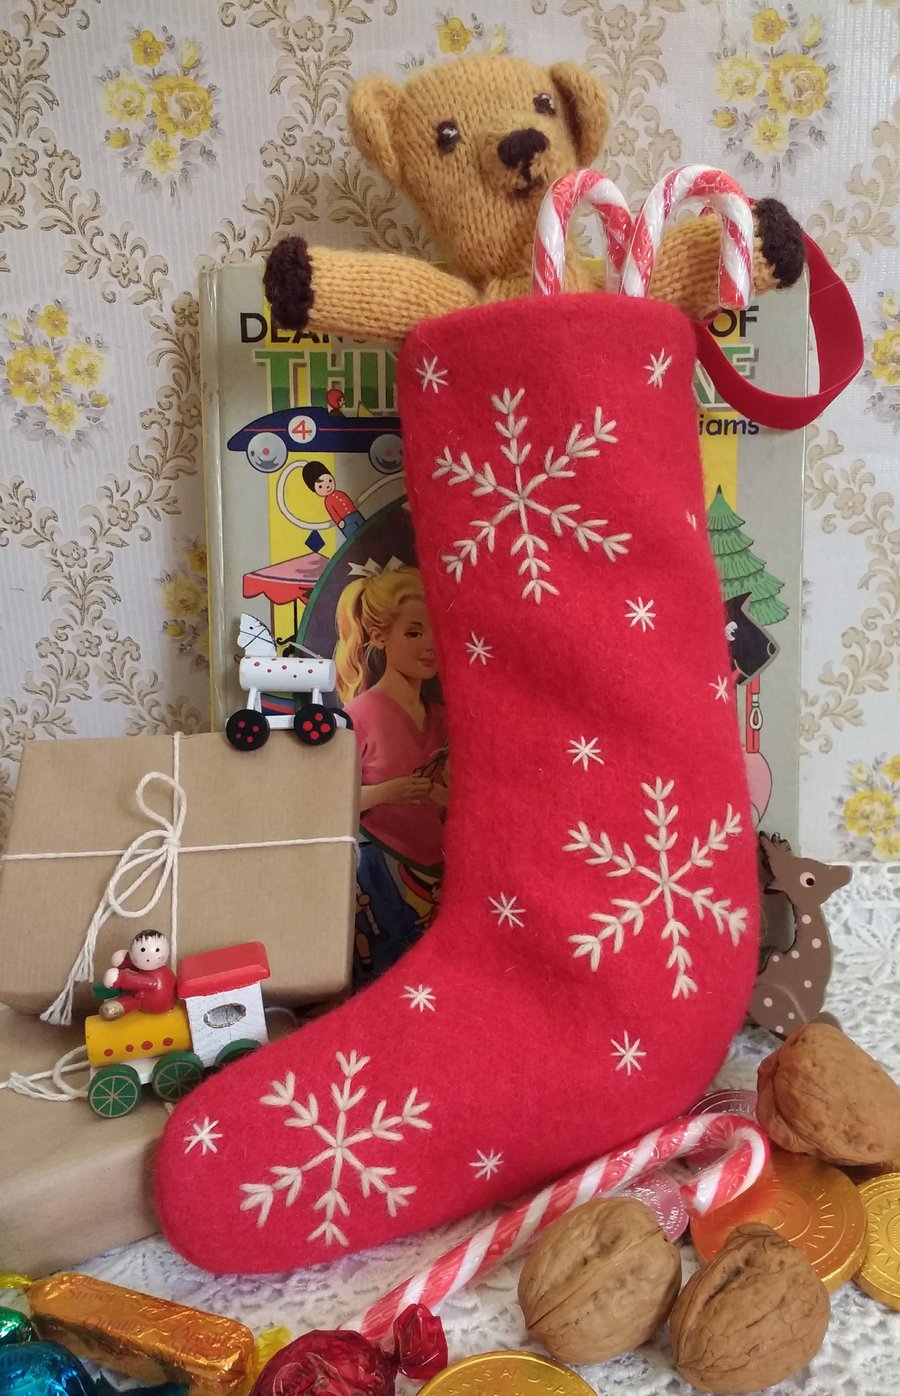 Wee sized embroidered Christmas stocking